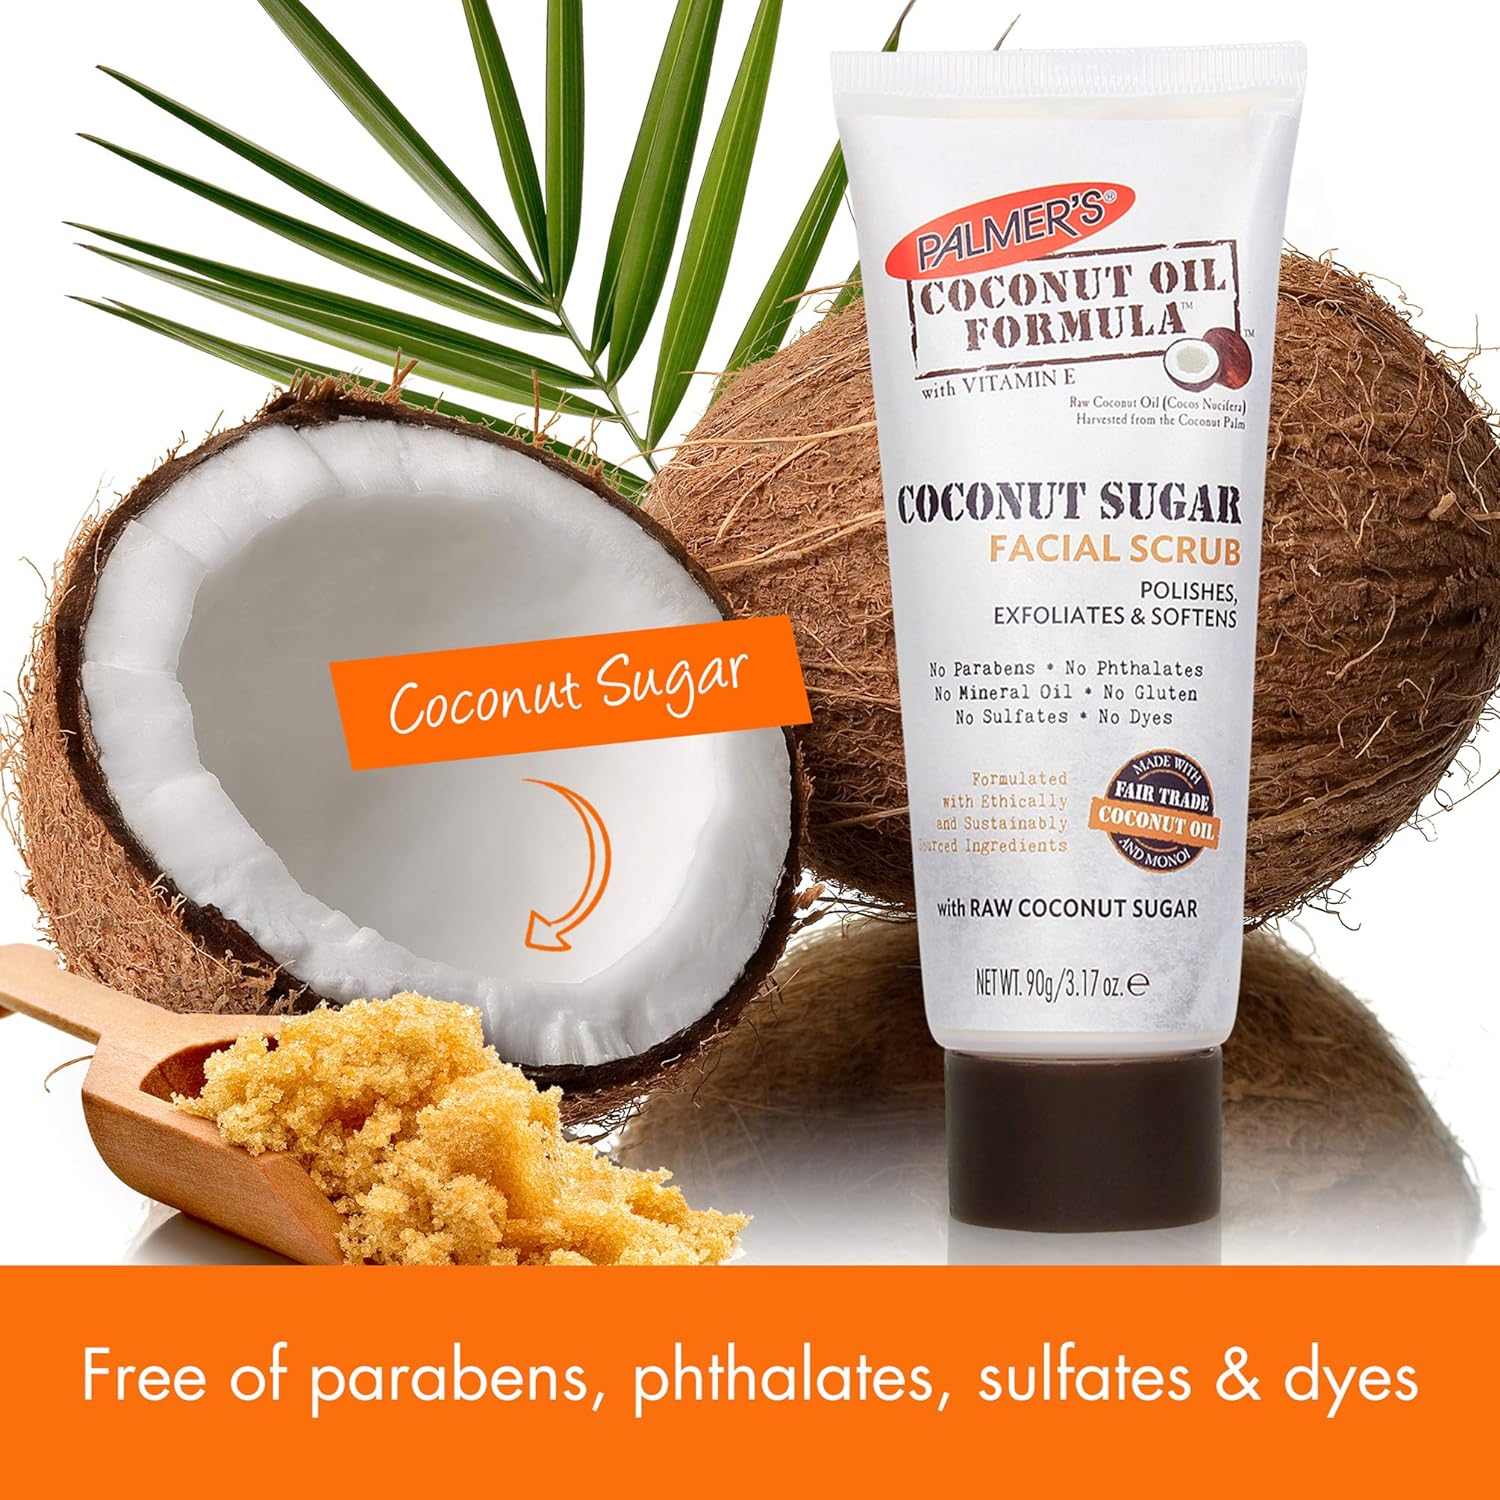 Palmer's Coconut Oil Formula Coconut Sugar Facial Scrub Exfoliator, Face Scrub to Gently Exfoliate Away Dirt and Dead Skin Cells with Chamomile to Soften & Calm, 3.17 Ounces (Pack of 1) : Everything Else